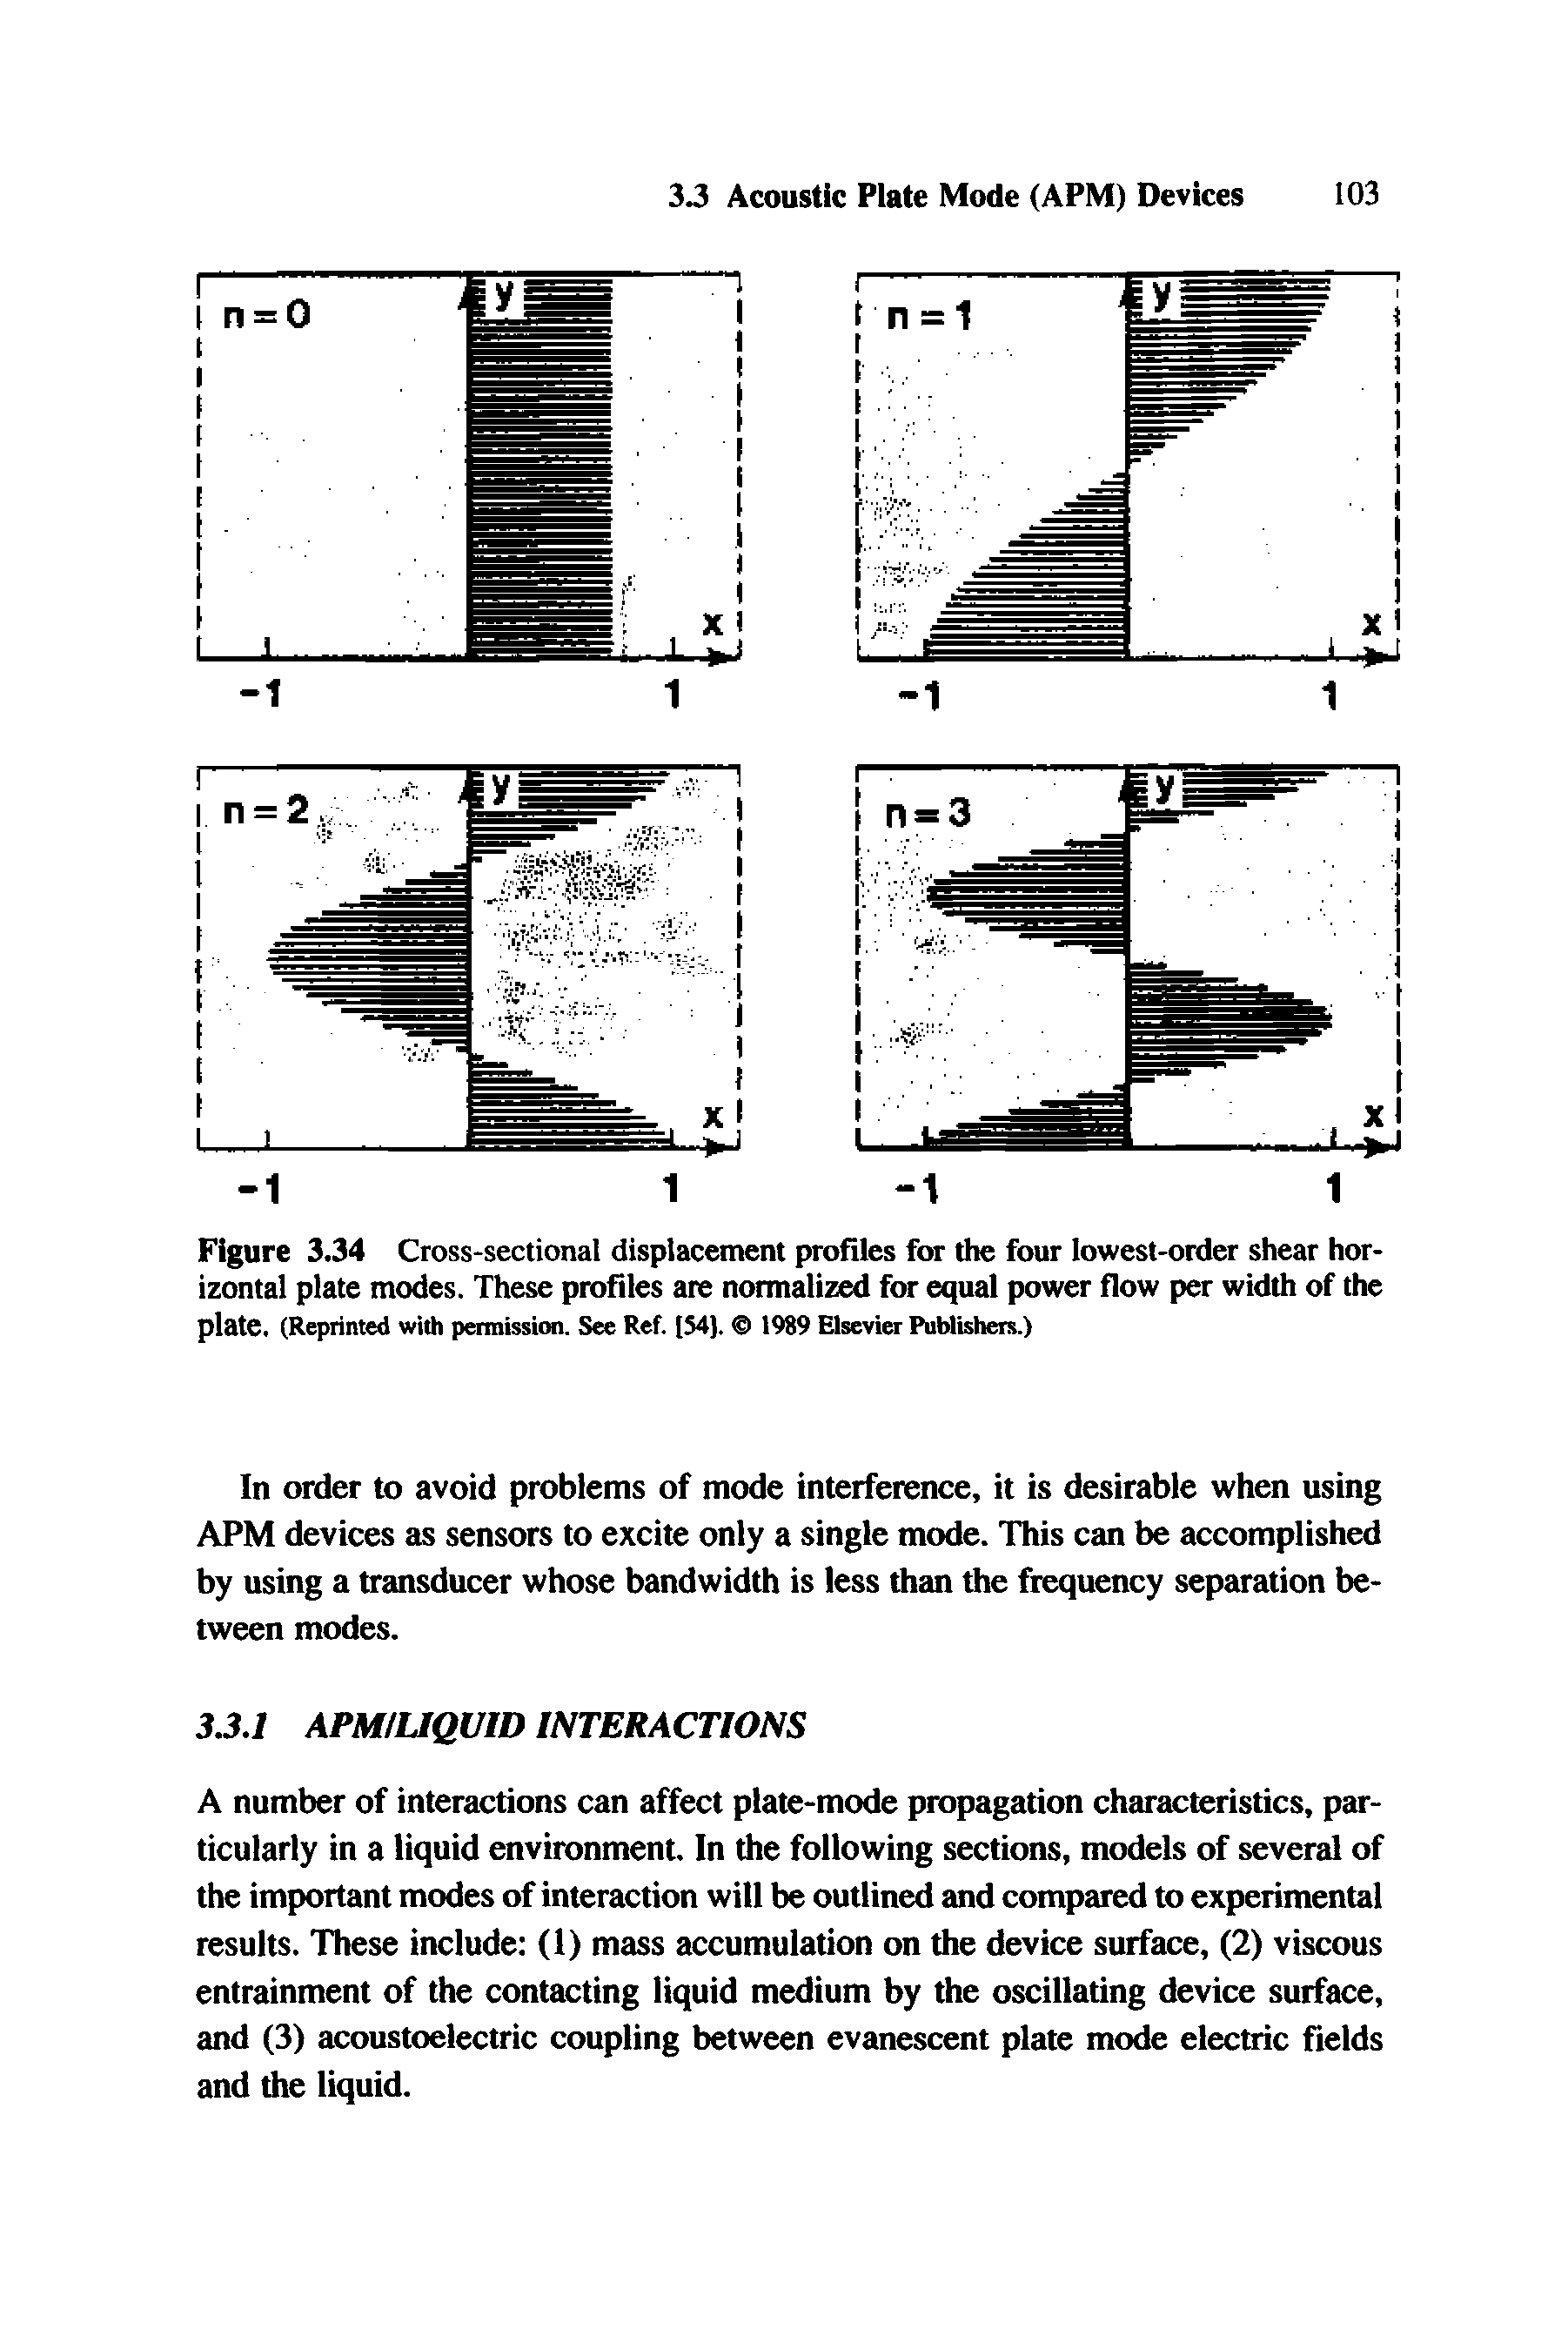 Figure 3.34 Cross-sectional displacement profiles for the four lowest-order shear horizontal plate modes. These profiles are normalized equal power flow per width of the plate. (Reprinted with permission. See Ref. [M). 1989 Elsevier PuMishers.)...